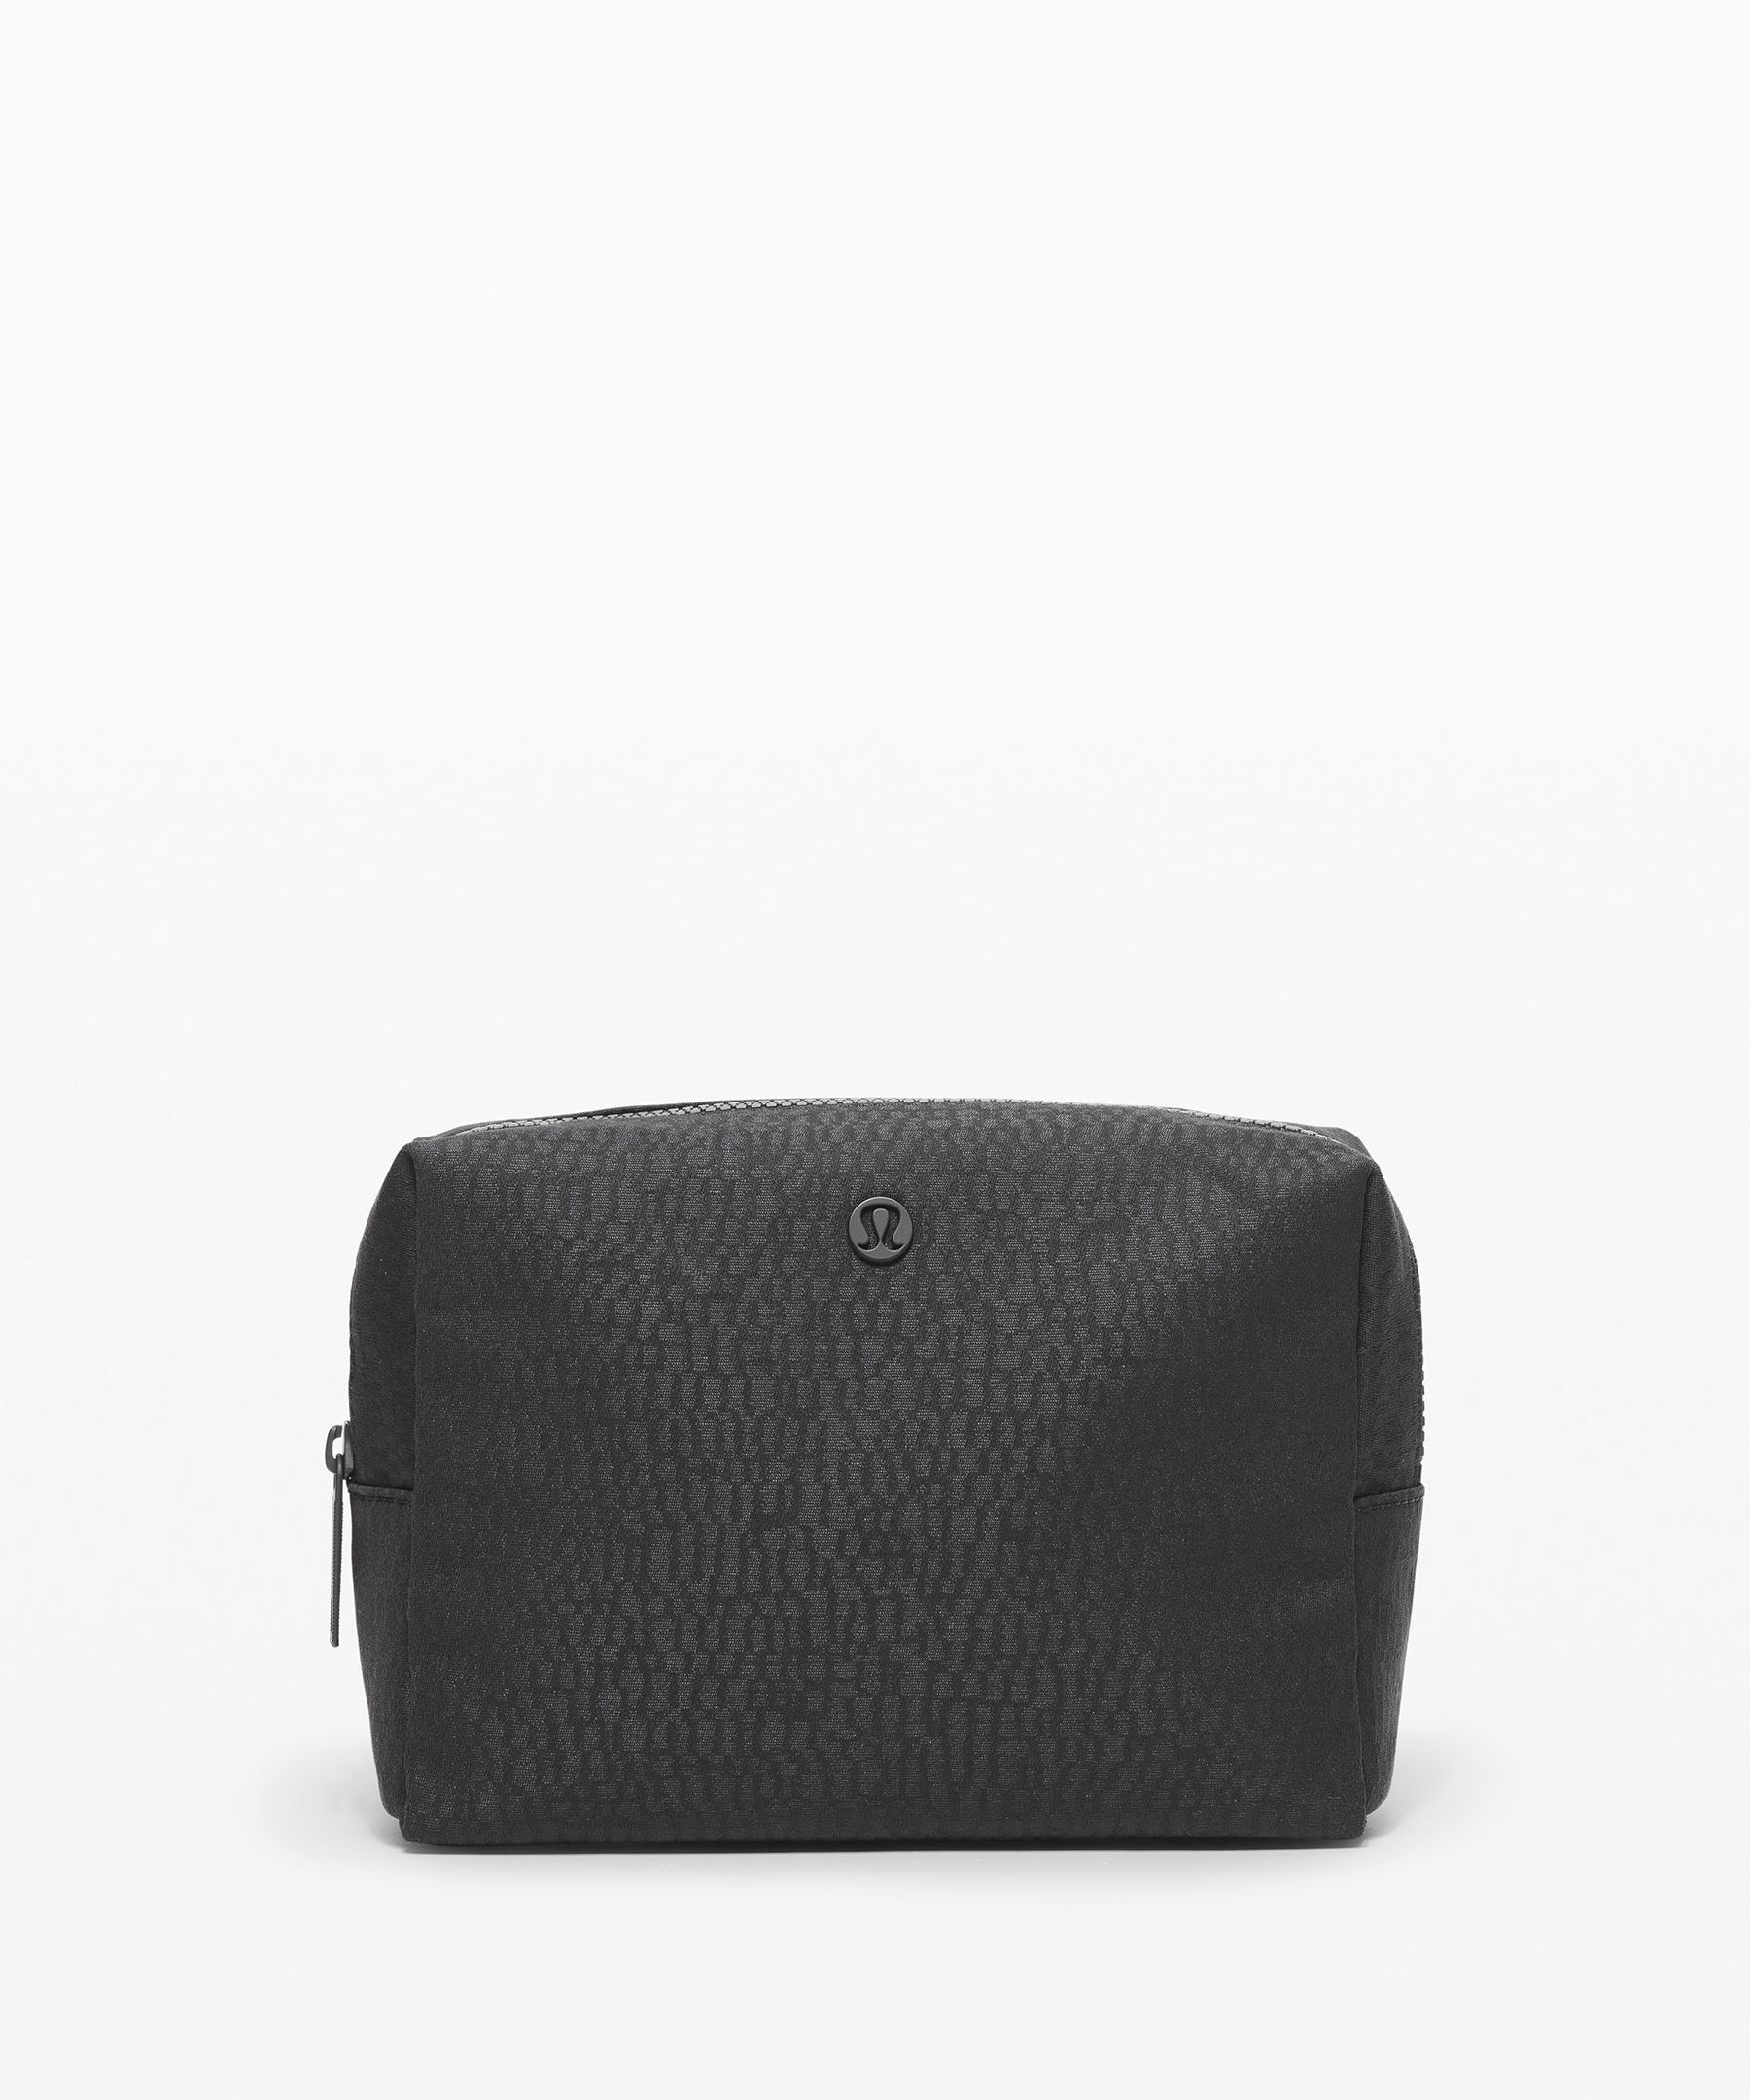 Lululemon All Your Small Things Pouch *4l In Stacked Jacquard Black Midnight